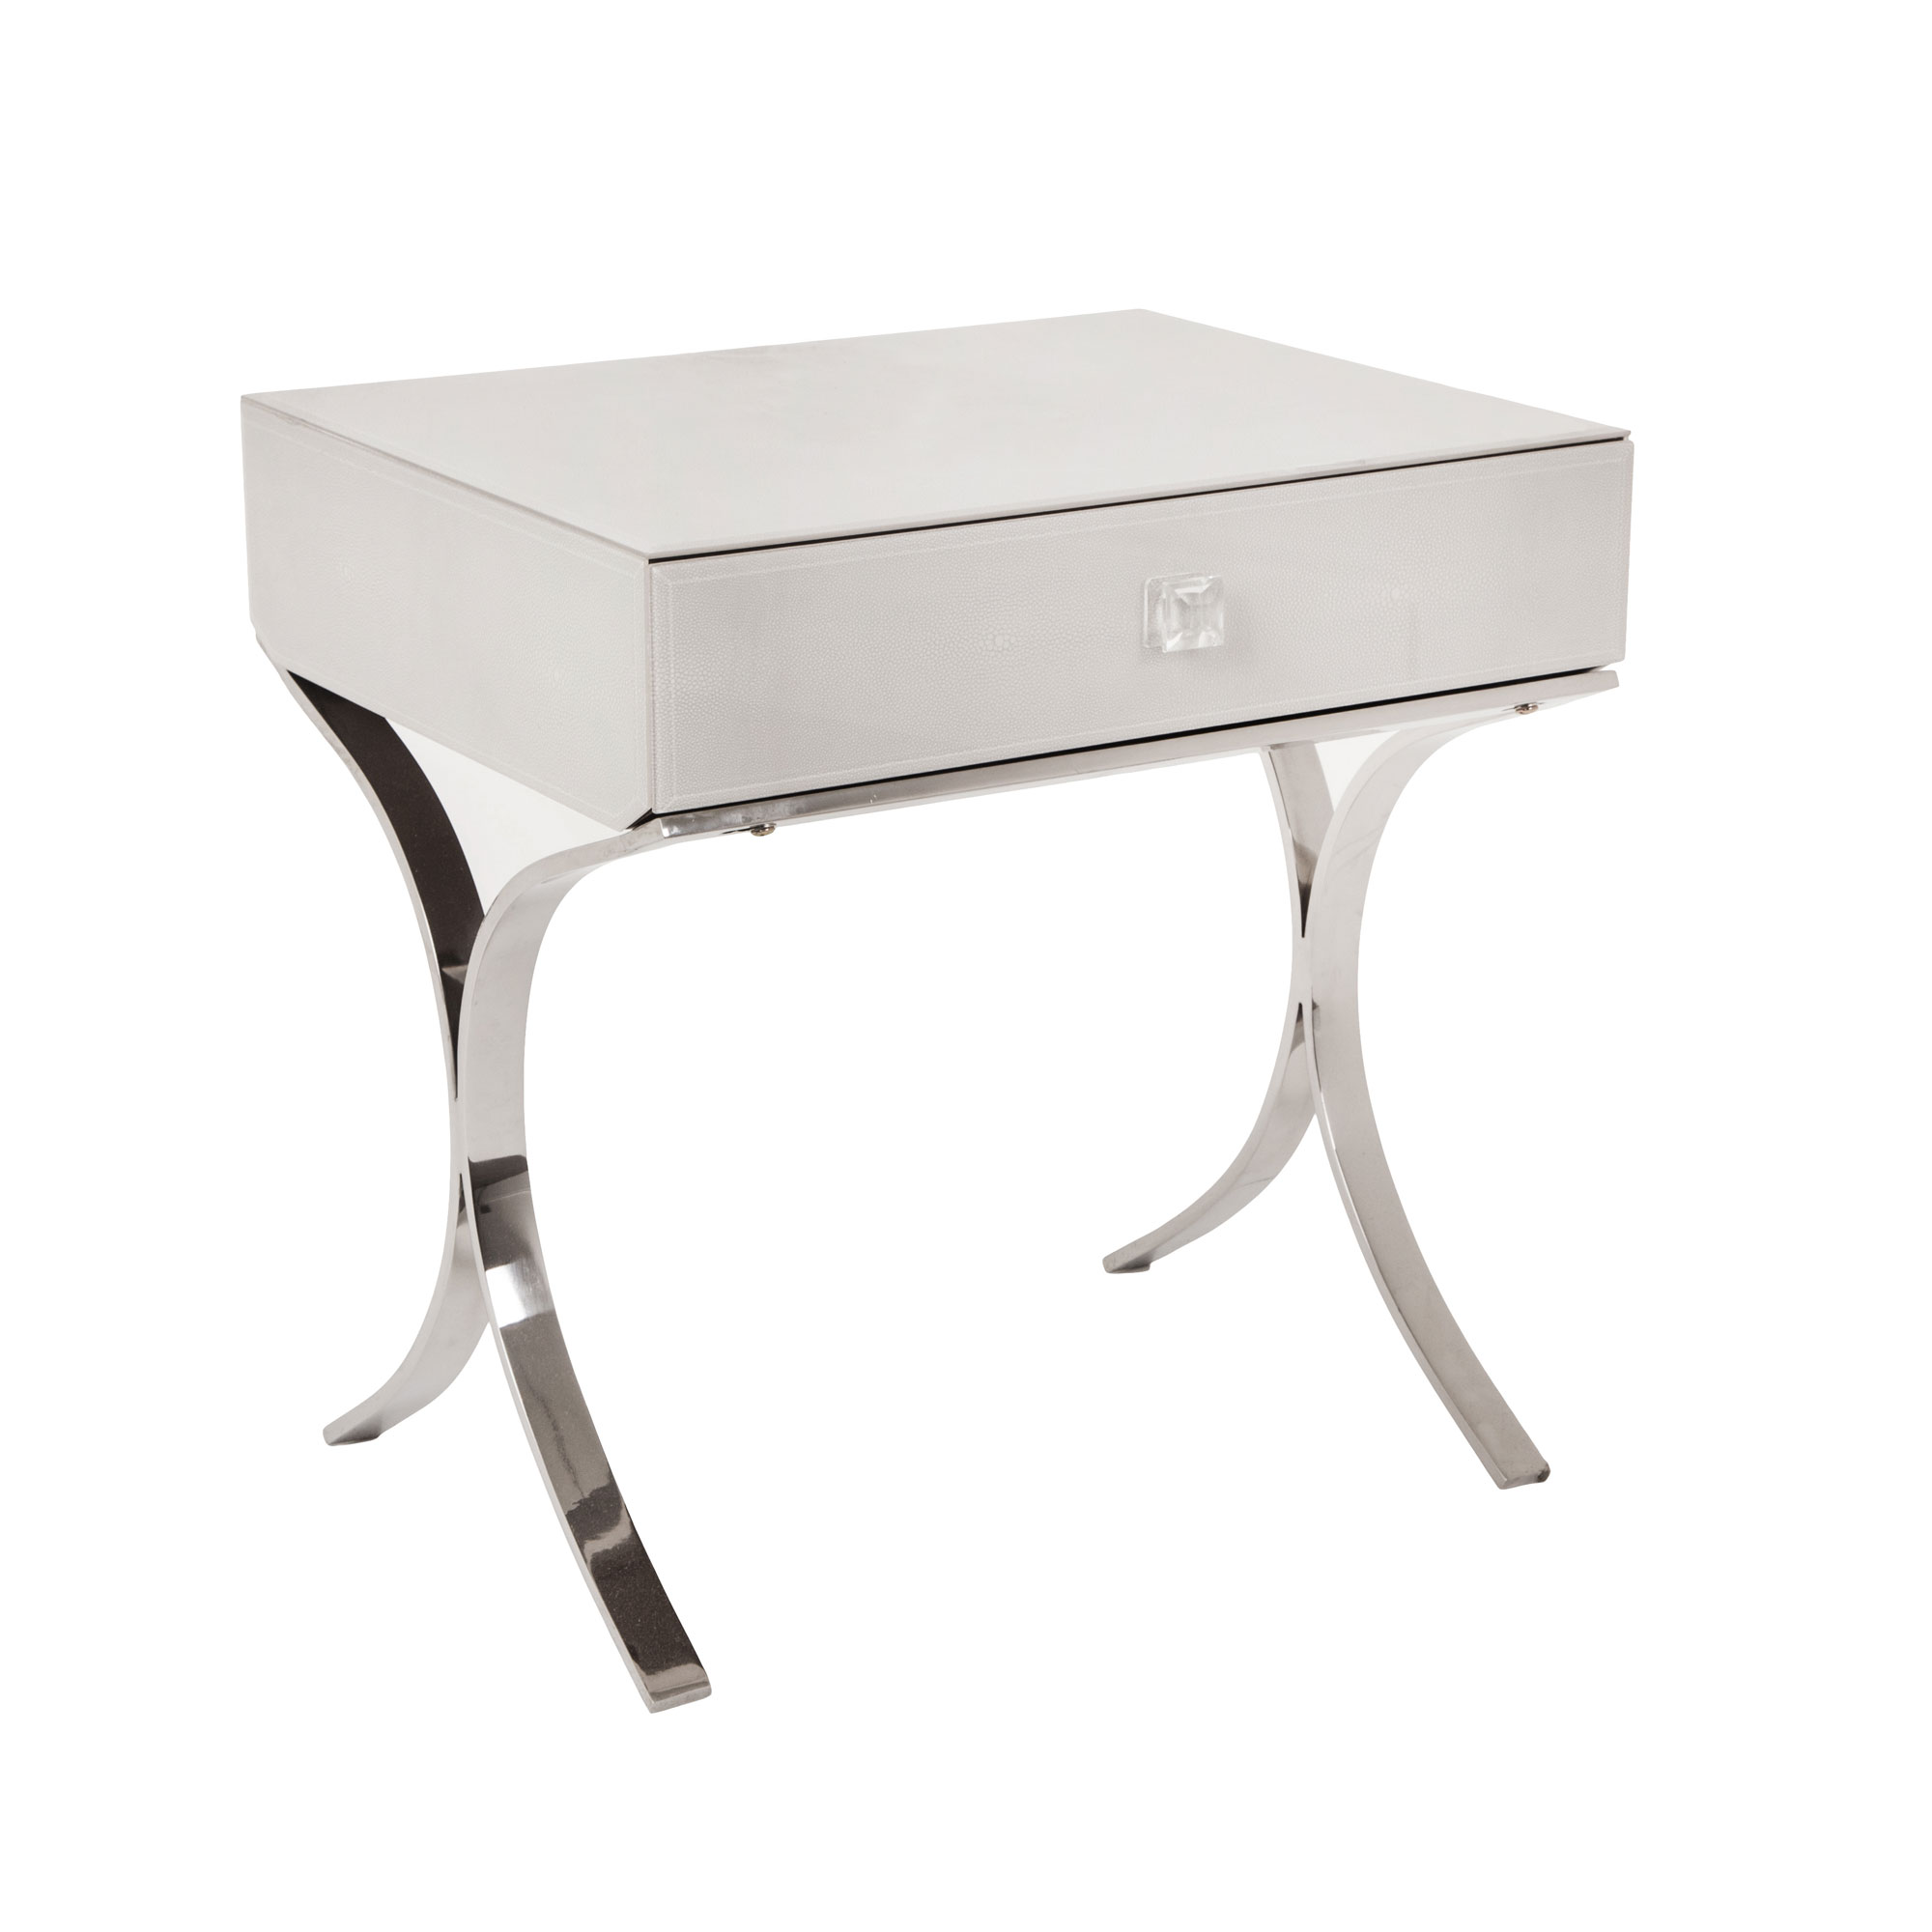 iced side table with stainless steel legs